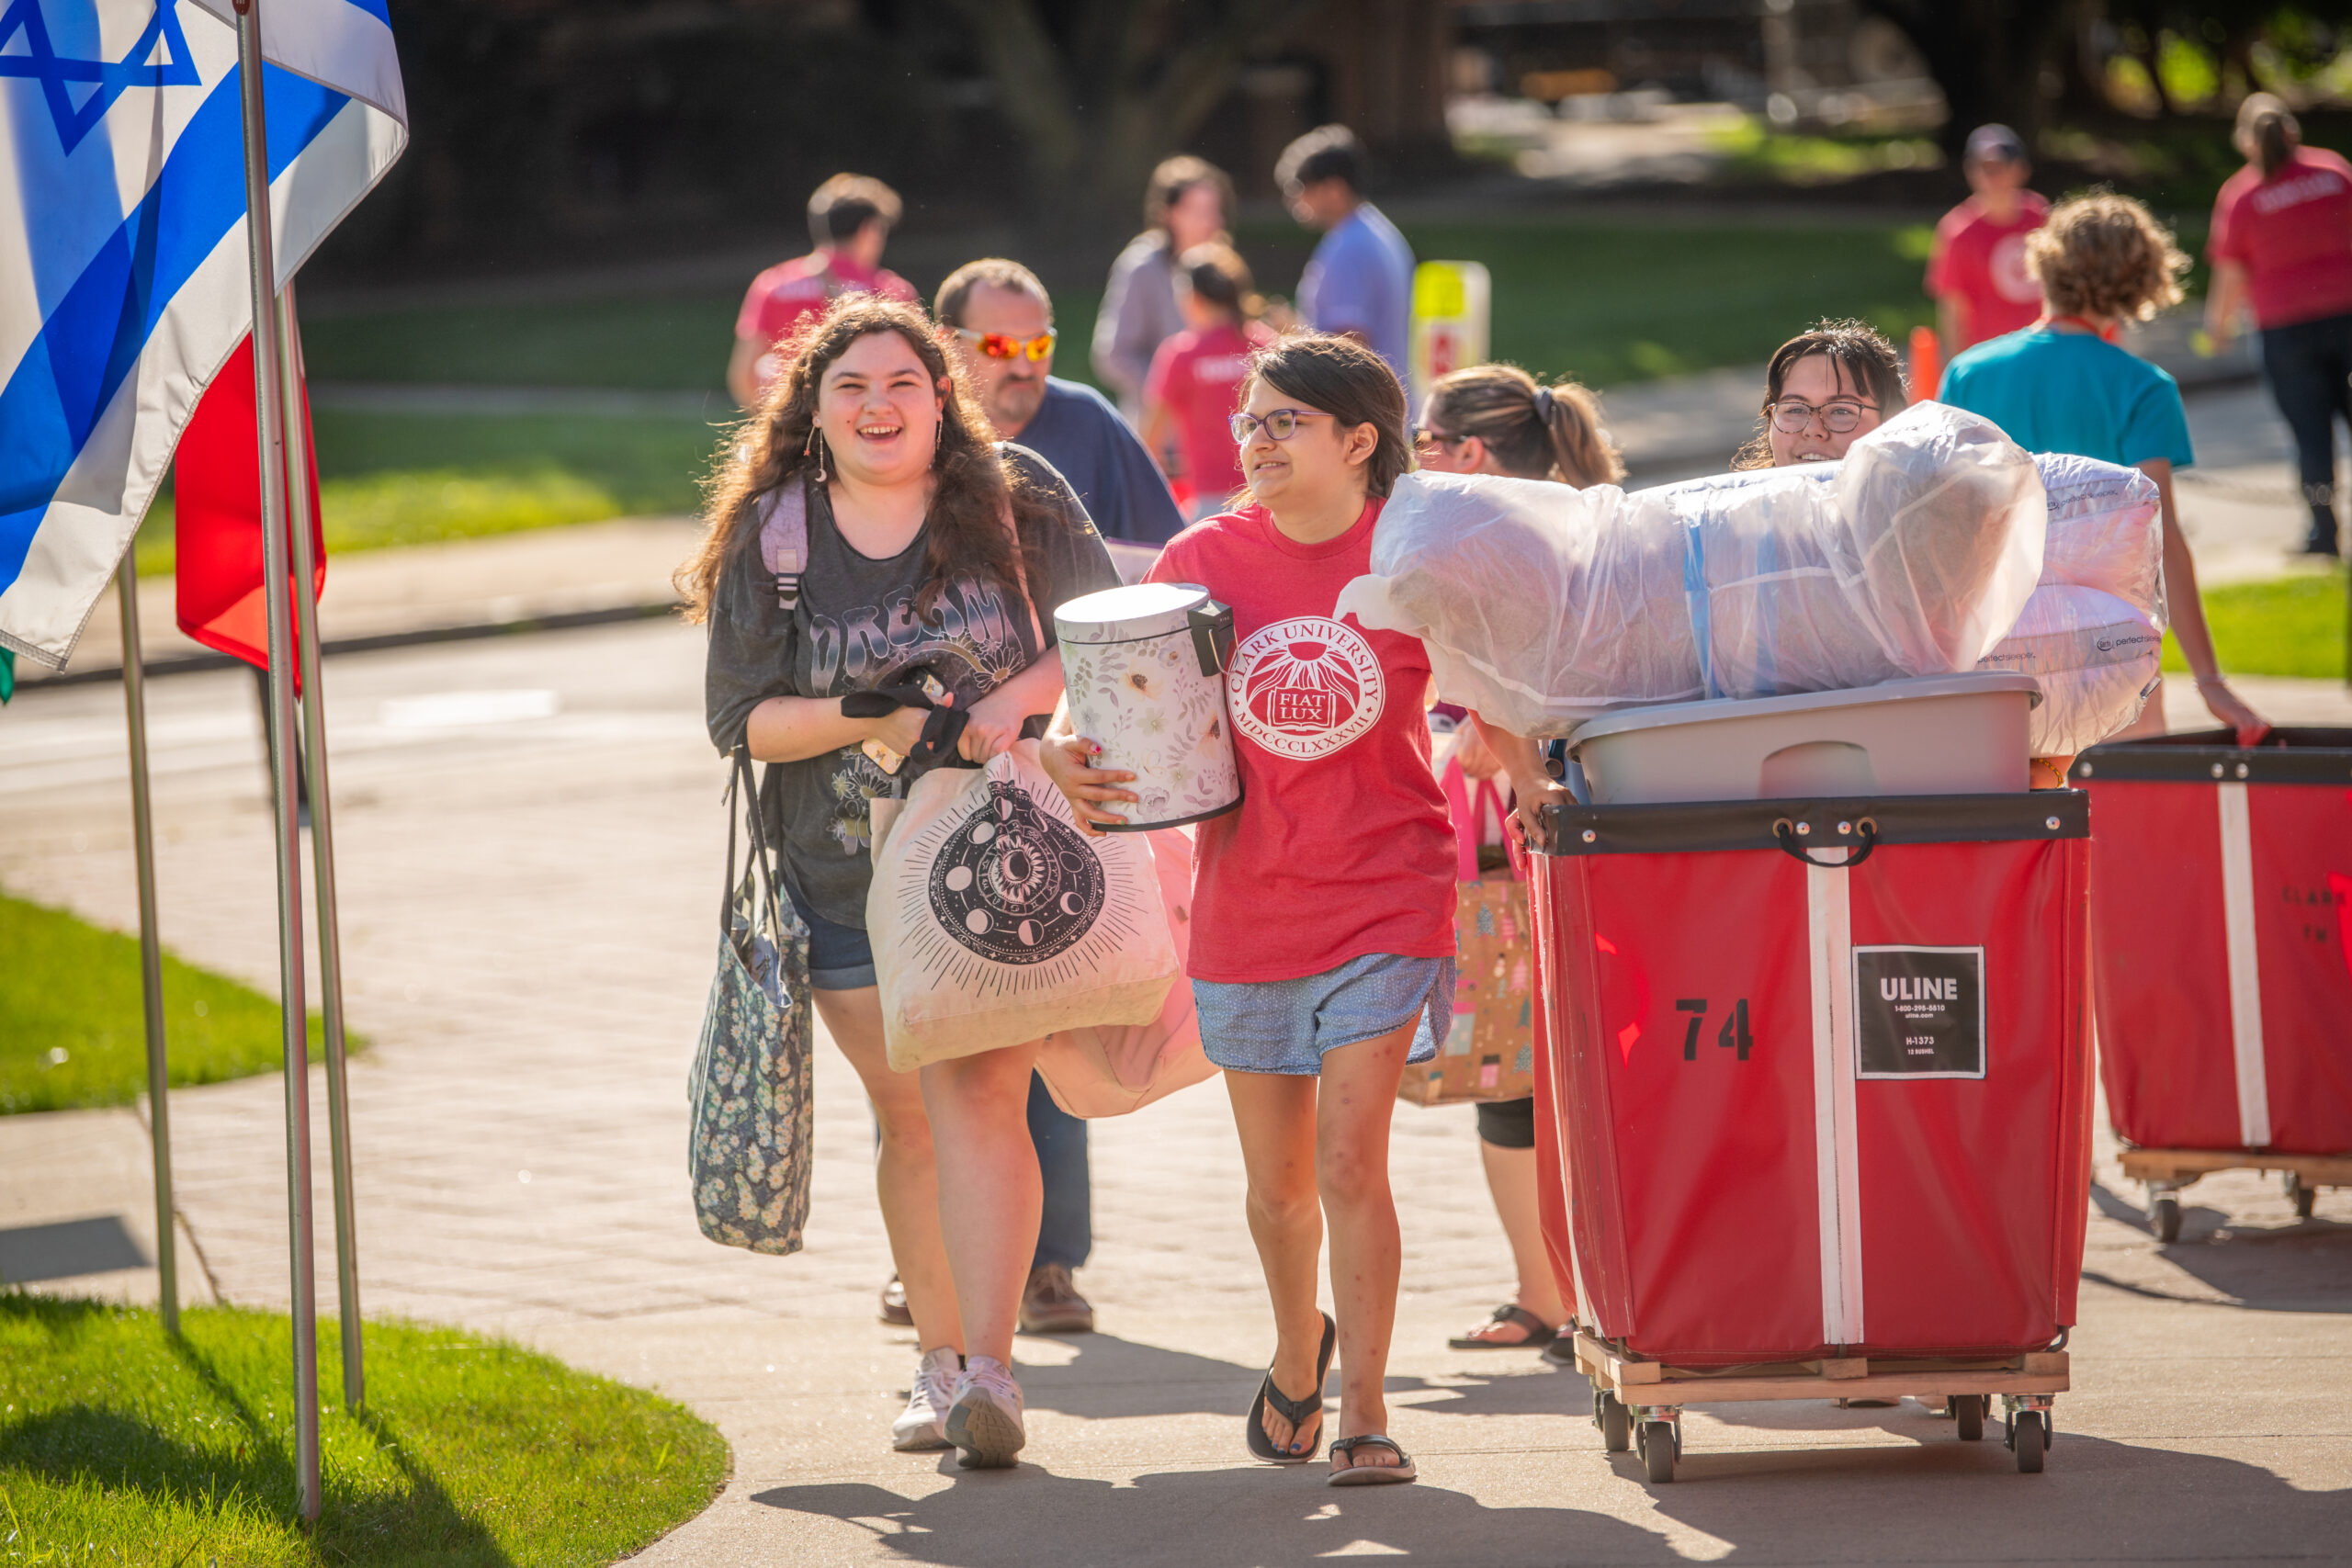 Students roll red bin on campus